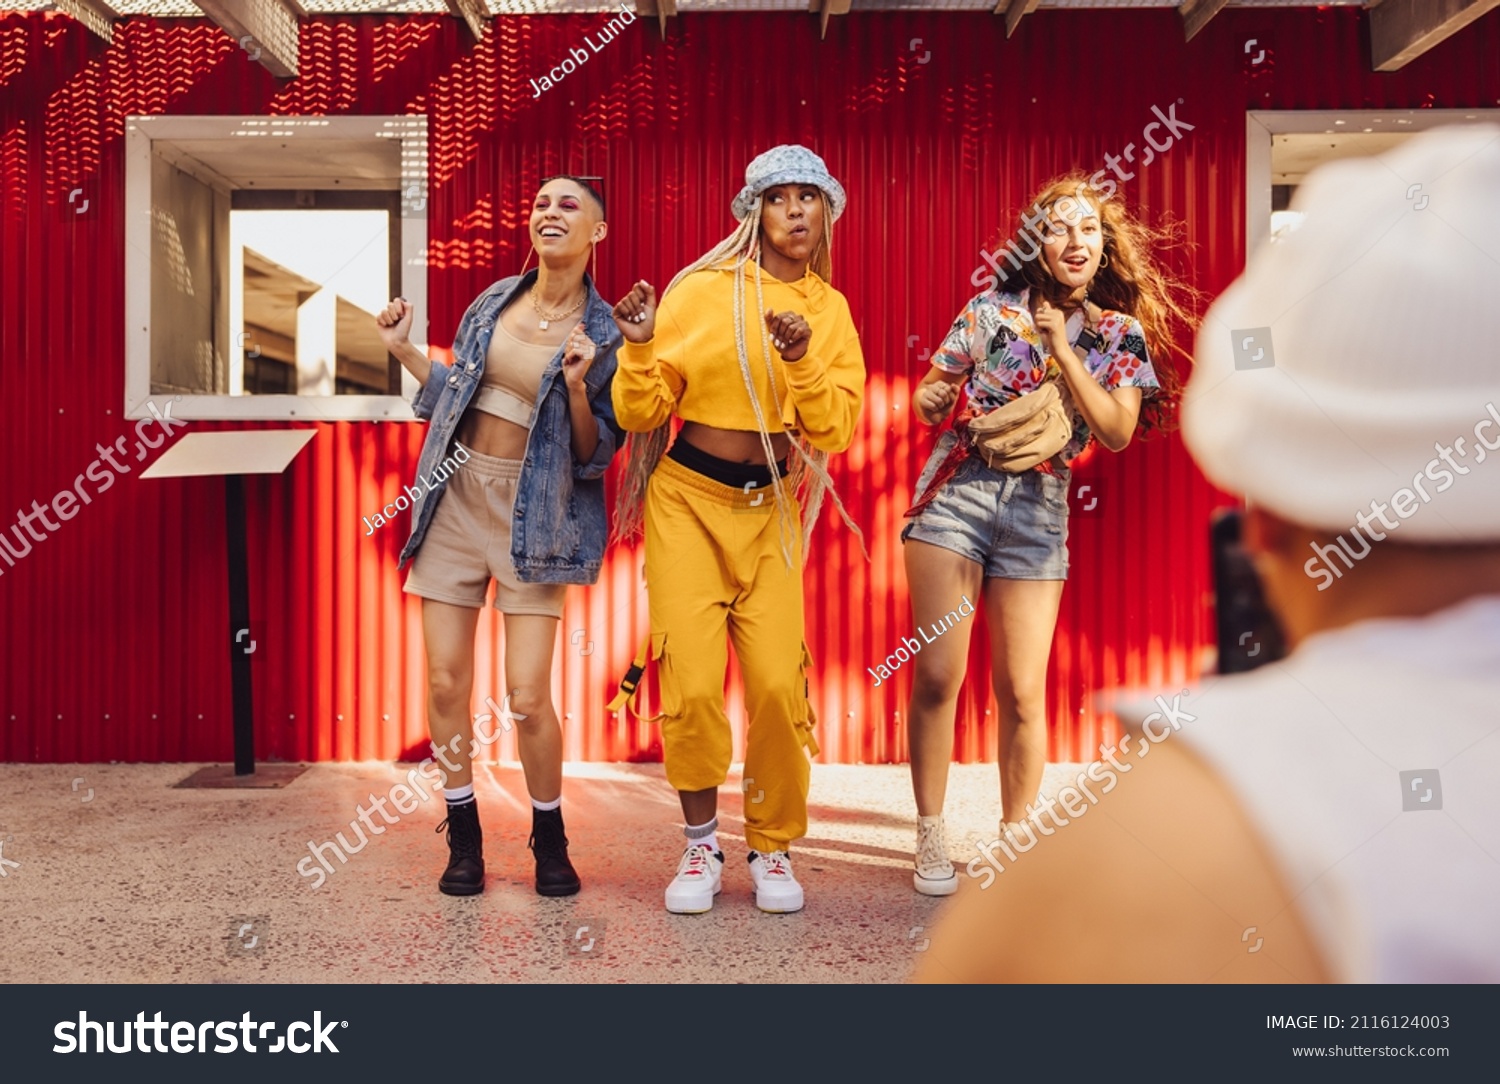 Following fun social media trends. Group of generation z friends doing trendy dance moves in front of a camera phone. Vibrant young people creating content for their social media vlog. #2116124003